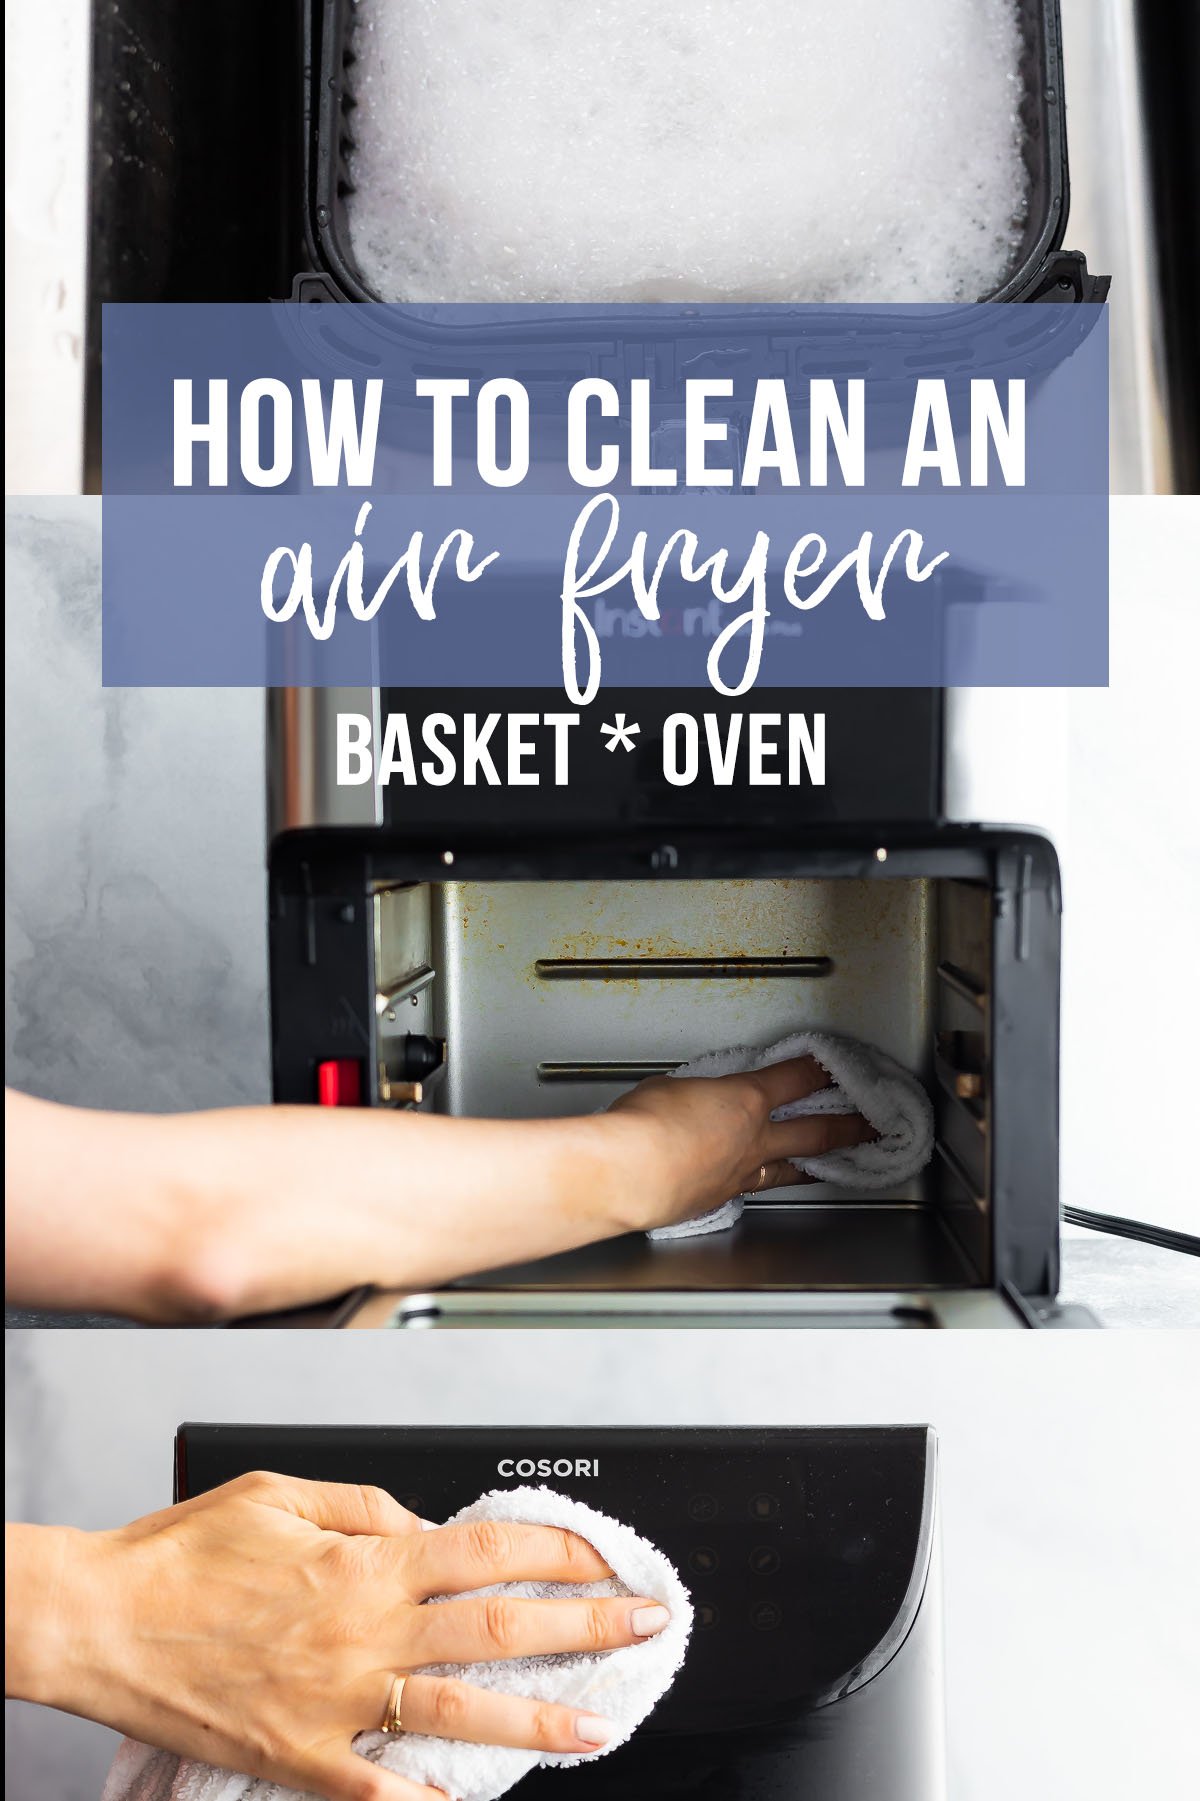 How to Clean an Air Fryer in 4 Easy Steps